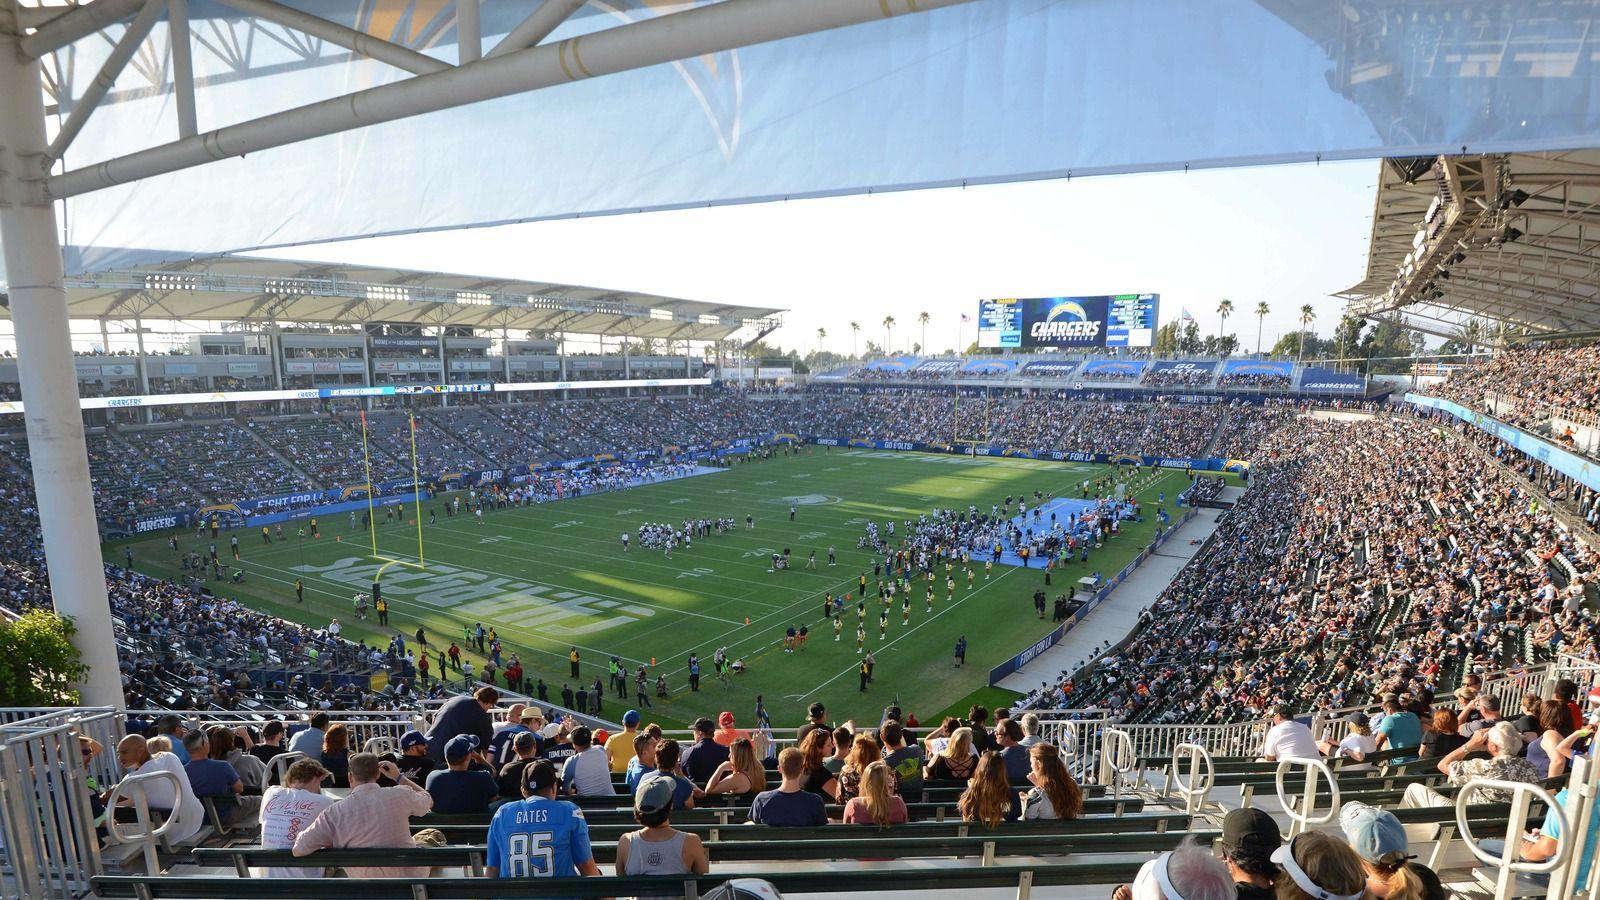 LA Galaxy outdraws Chargers at StubHub Center by over 4K fans